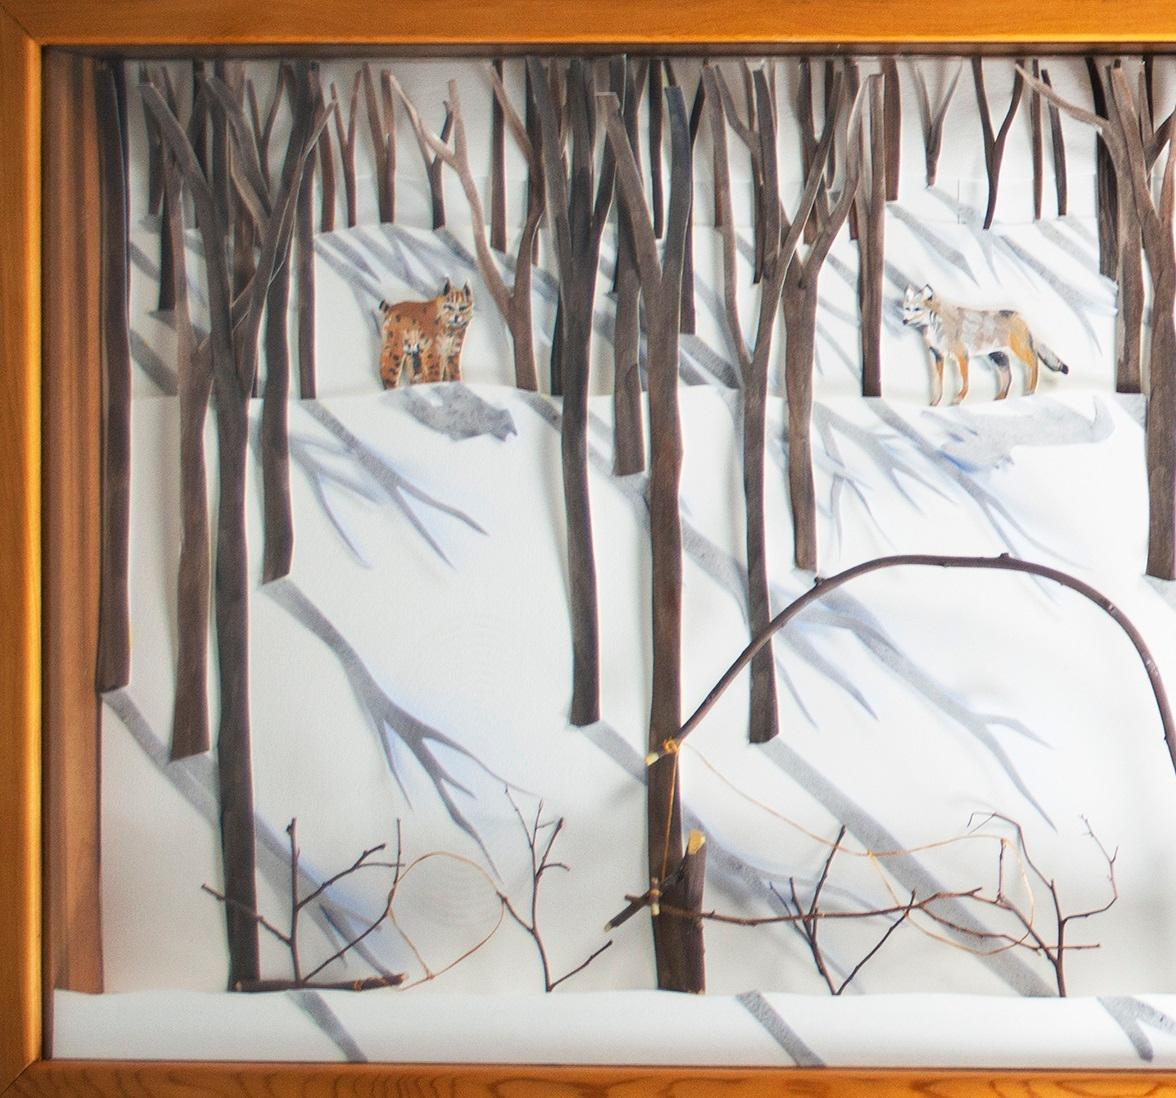 Art: 16 x 48 x 2 5/8 inches
Mixed media construction, signed on reverse

Artist Tom Shelton creates very innovative constructions and paintings dealing with animals in their natural habitat. He graduated with a B.S. in Botany from the University of